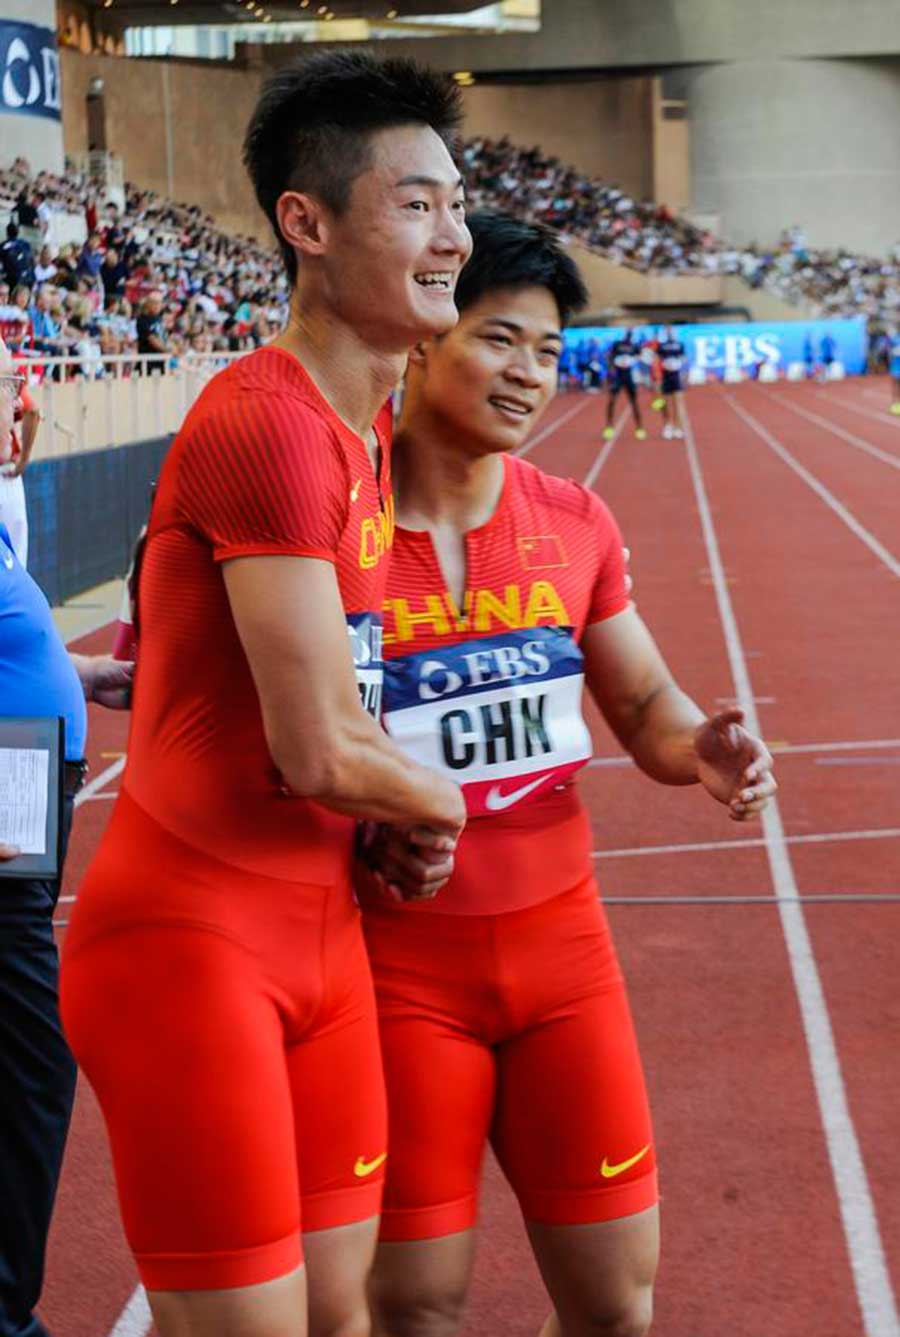 China claims shock victory in 4x100m relay at Diamond League Monaco meet